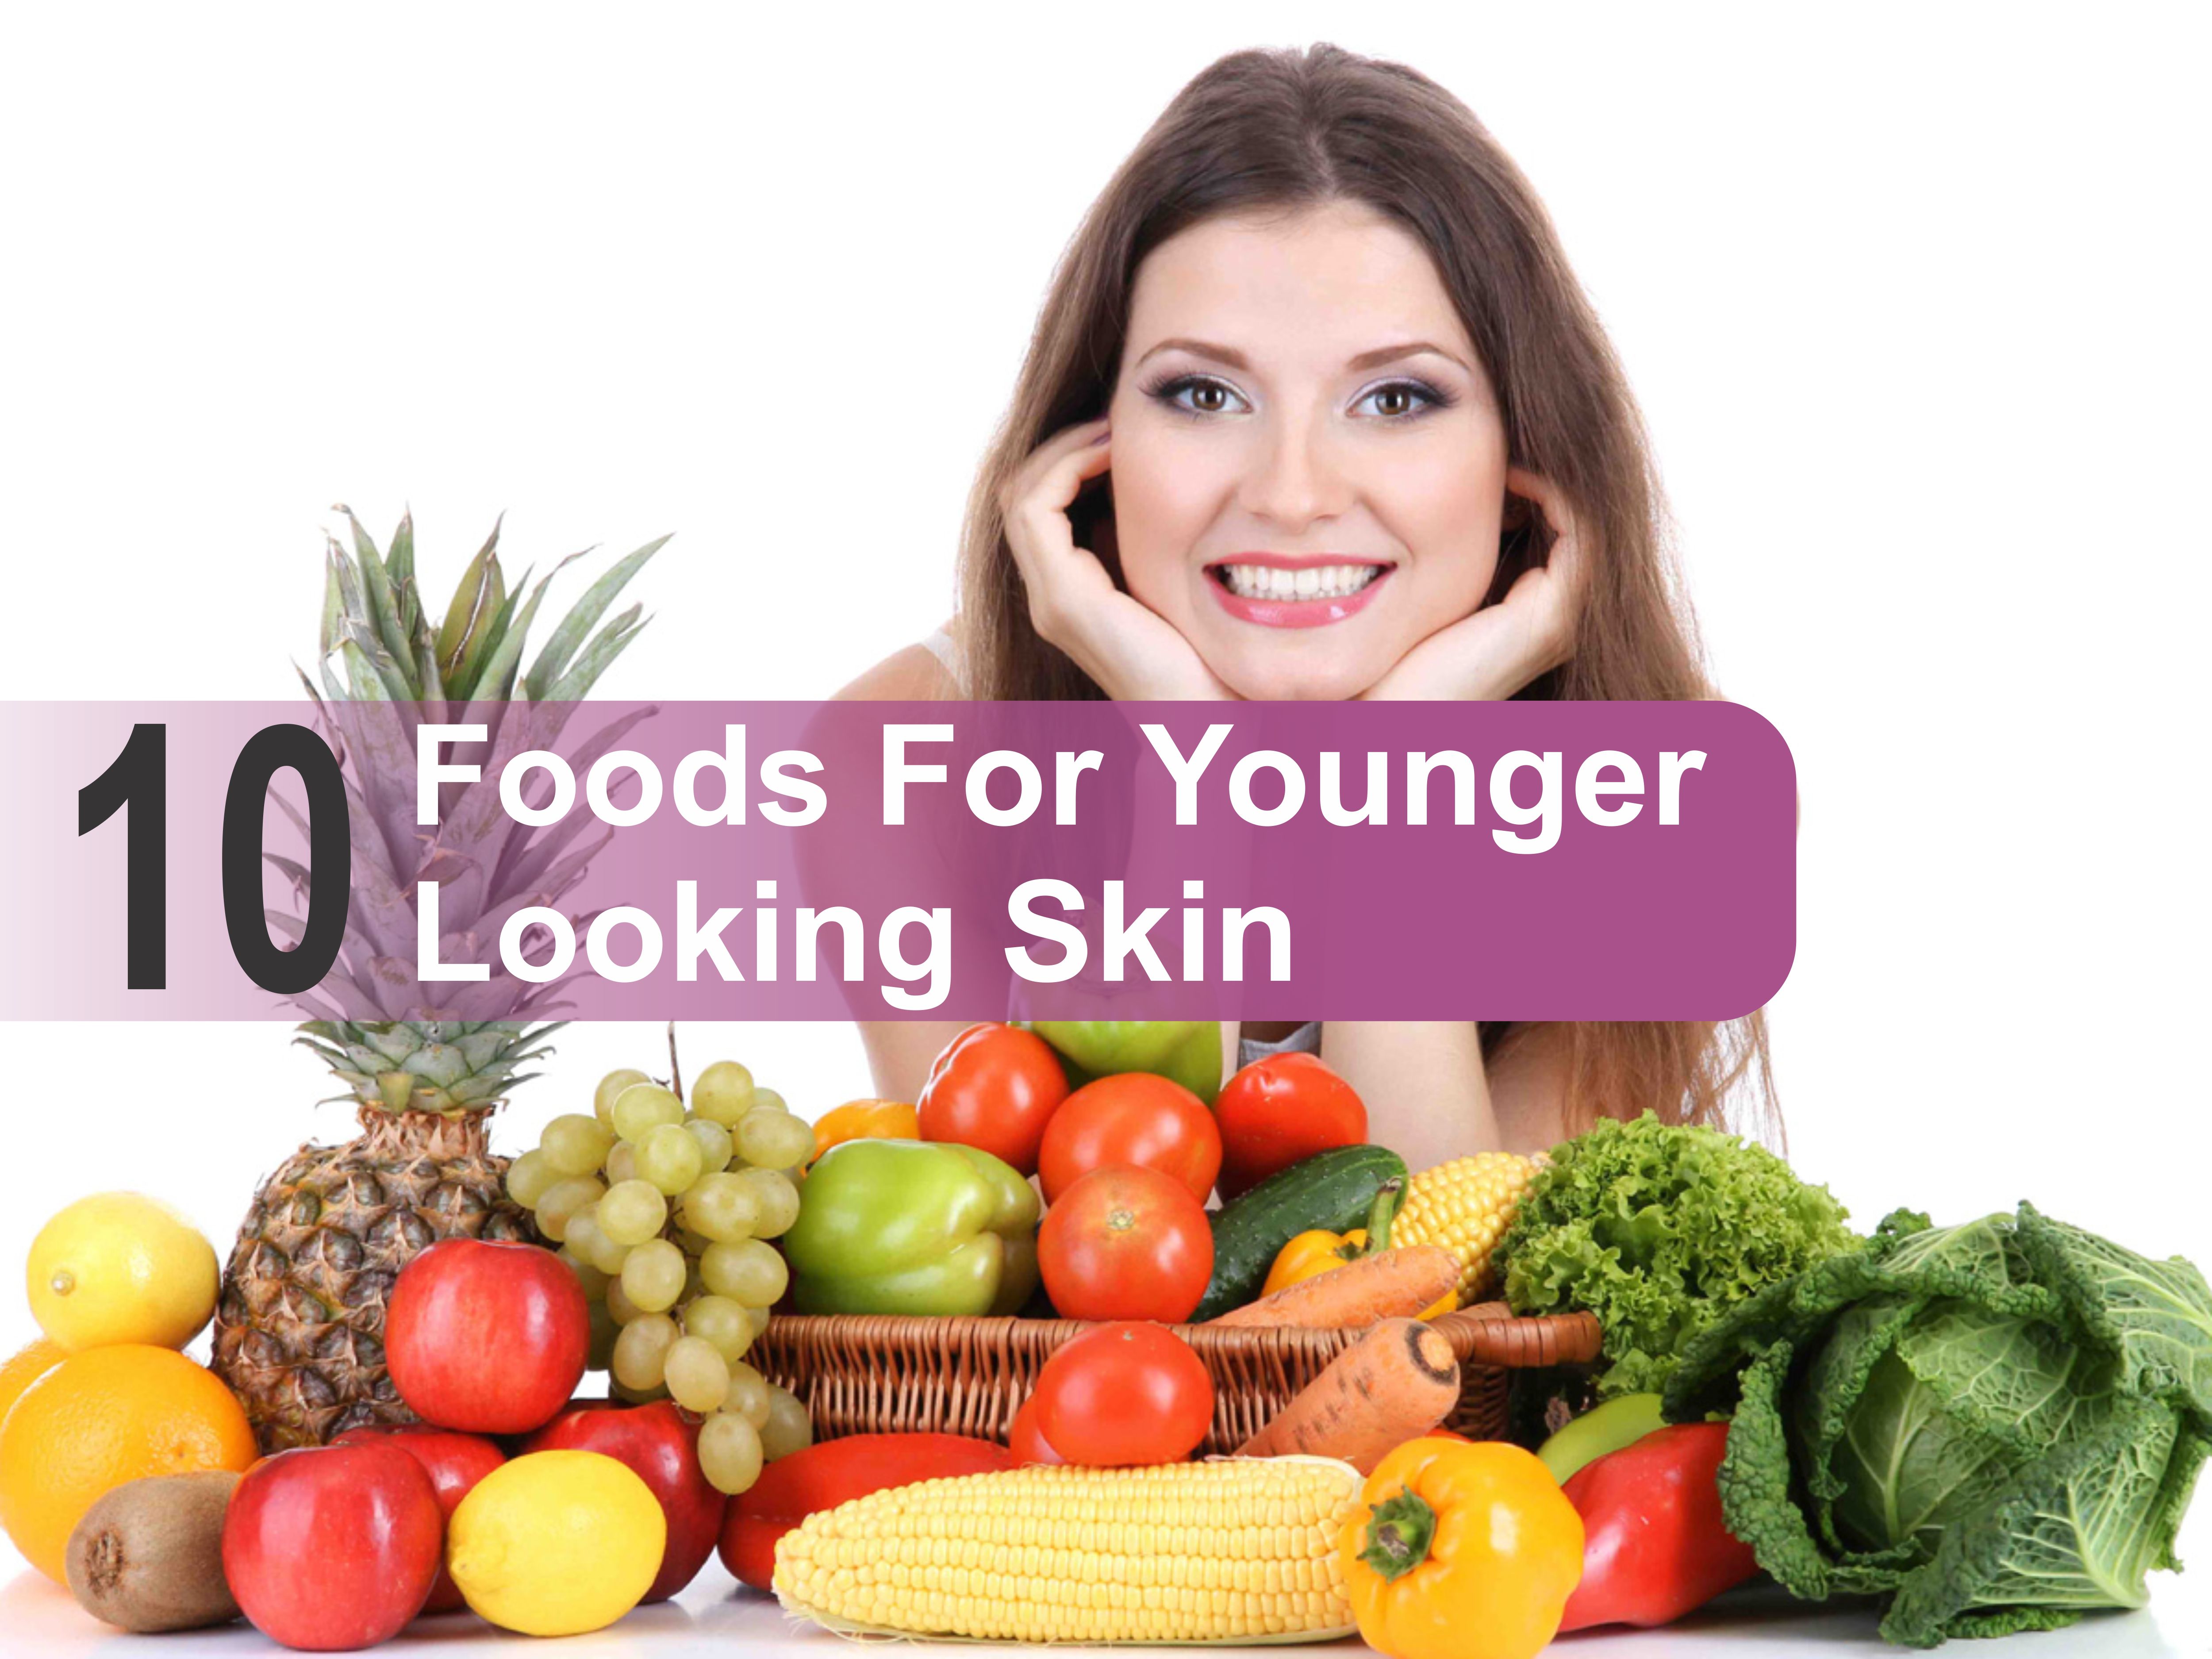 Foods For Younger Looking Skin